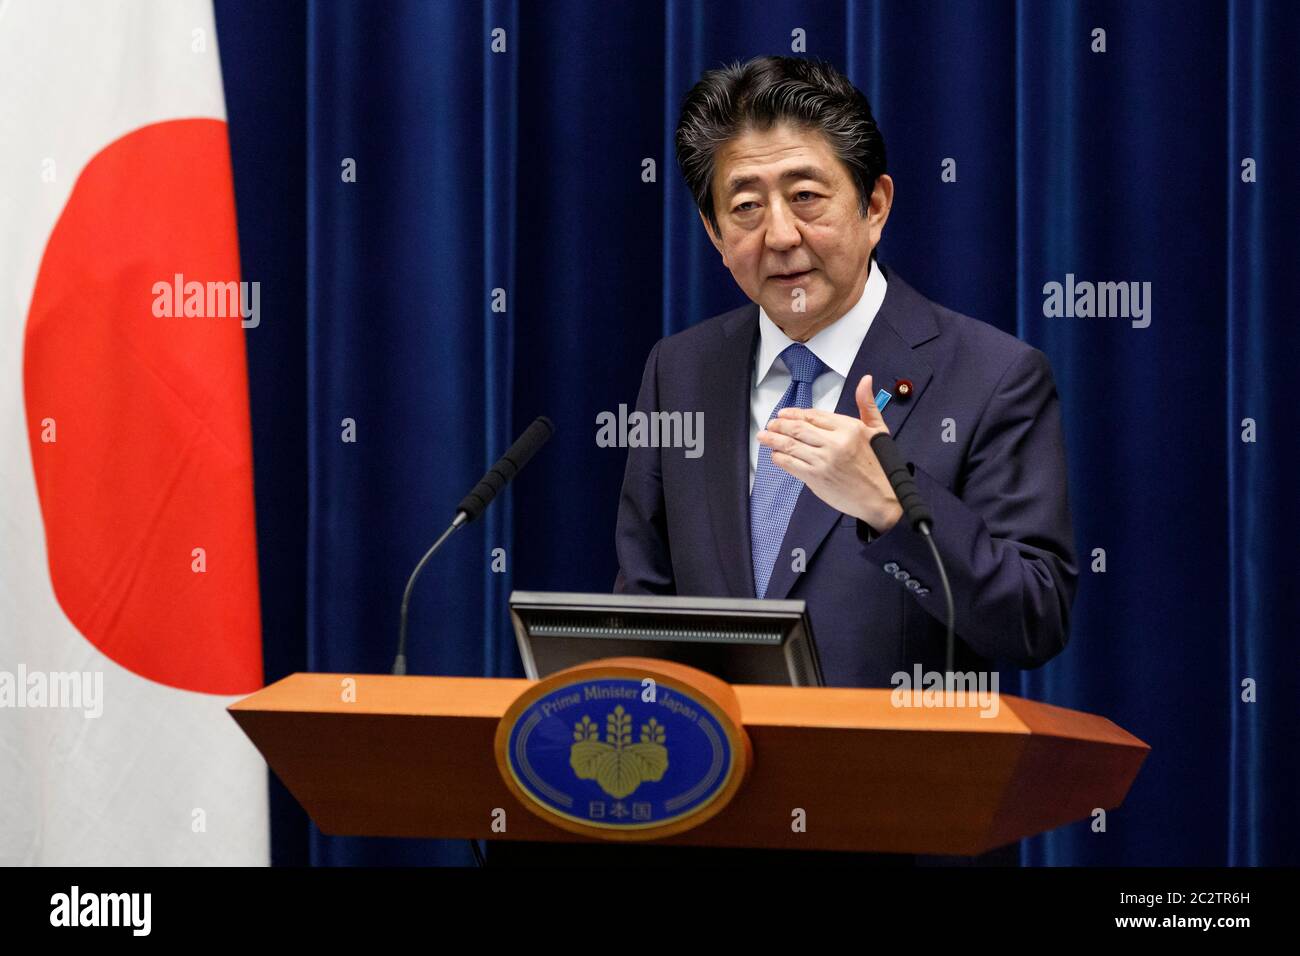 Tokyo, Japan. 18th June, 2020. Japan's Prime Minister Shinzo Abe speaks during a press conference at the prime minister's official residence. Credit: Rodrigo Reyes Marin/ZUMA Wire/Alamy Live News Stock Photo